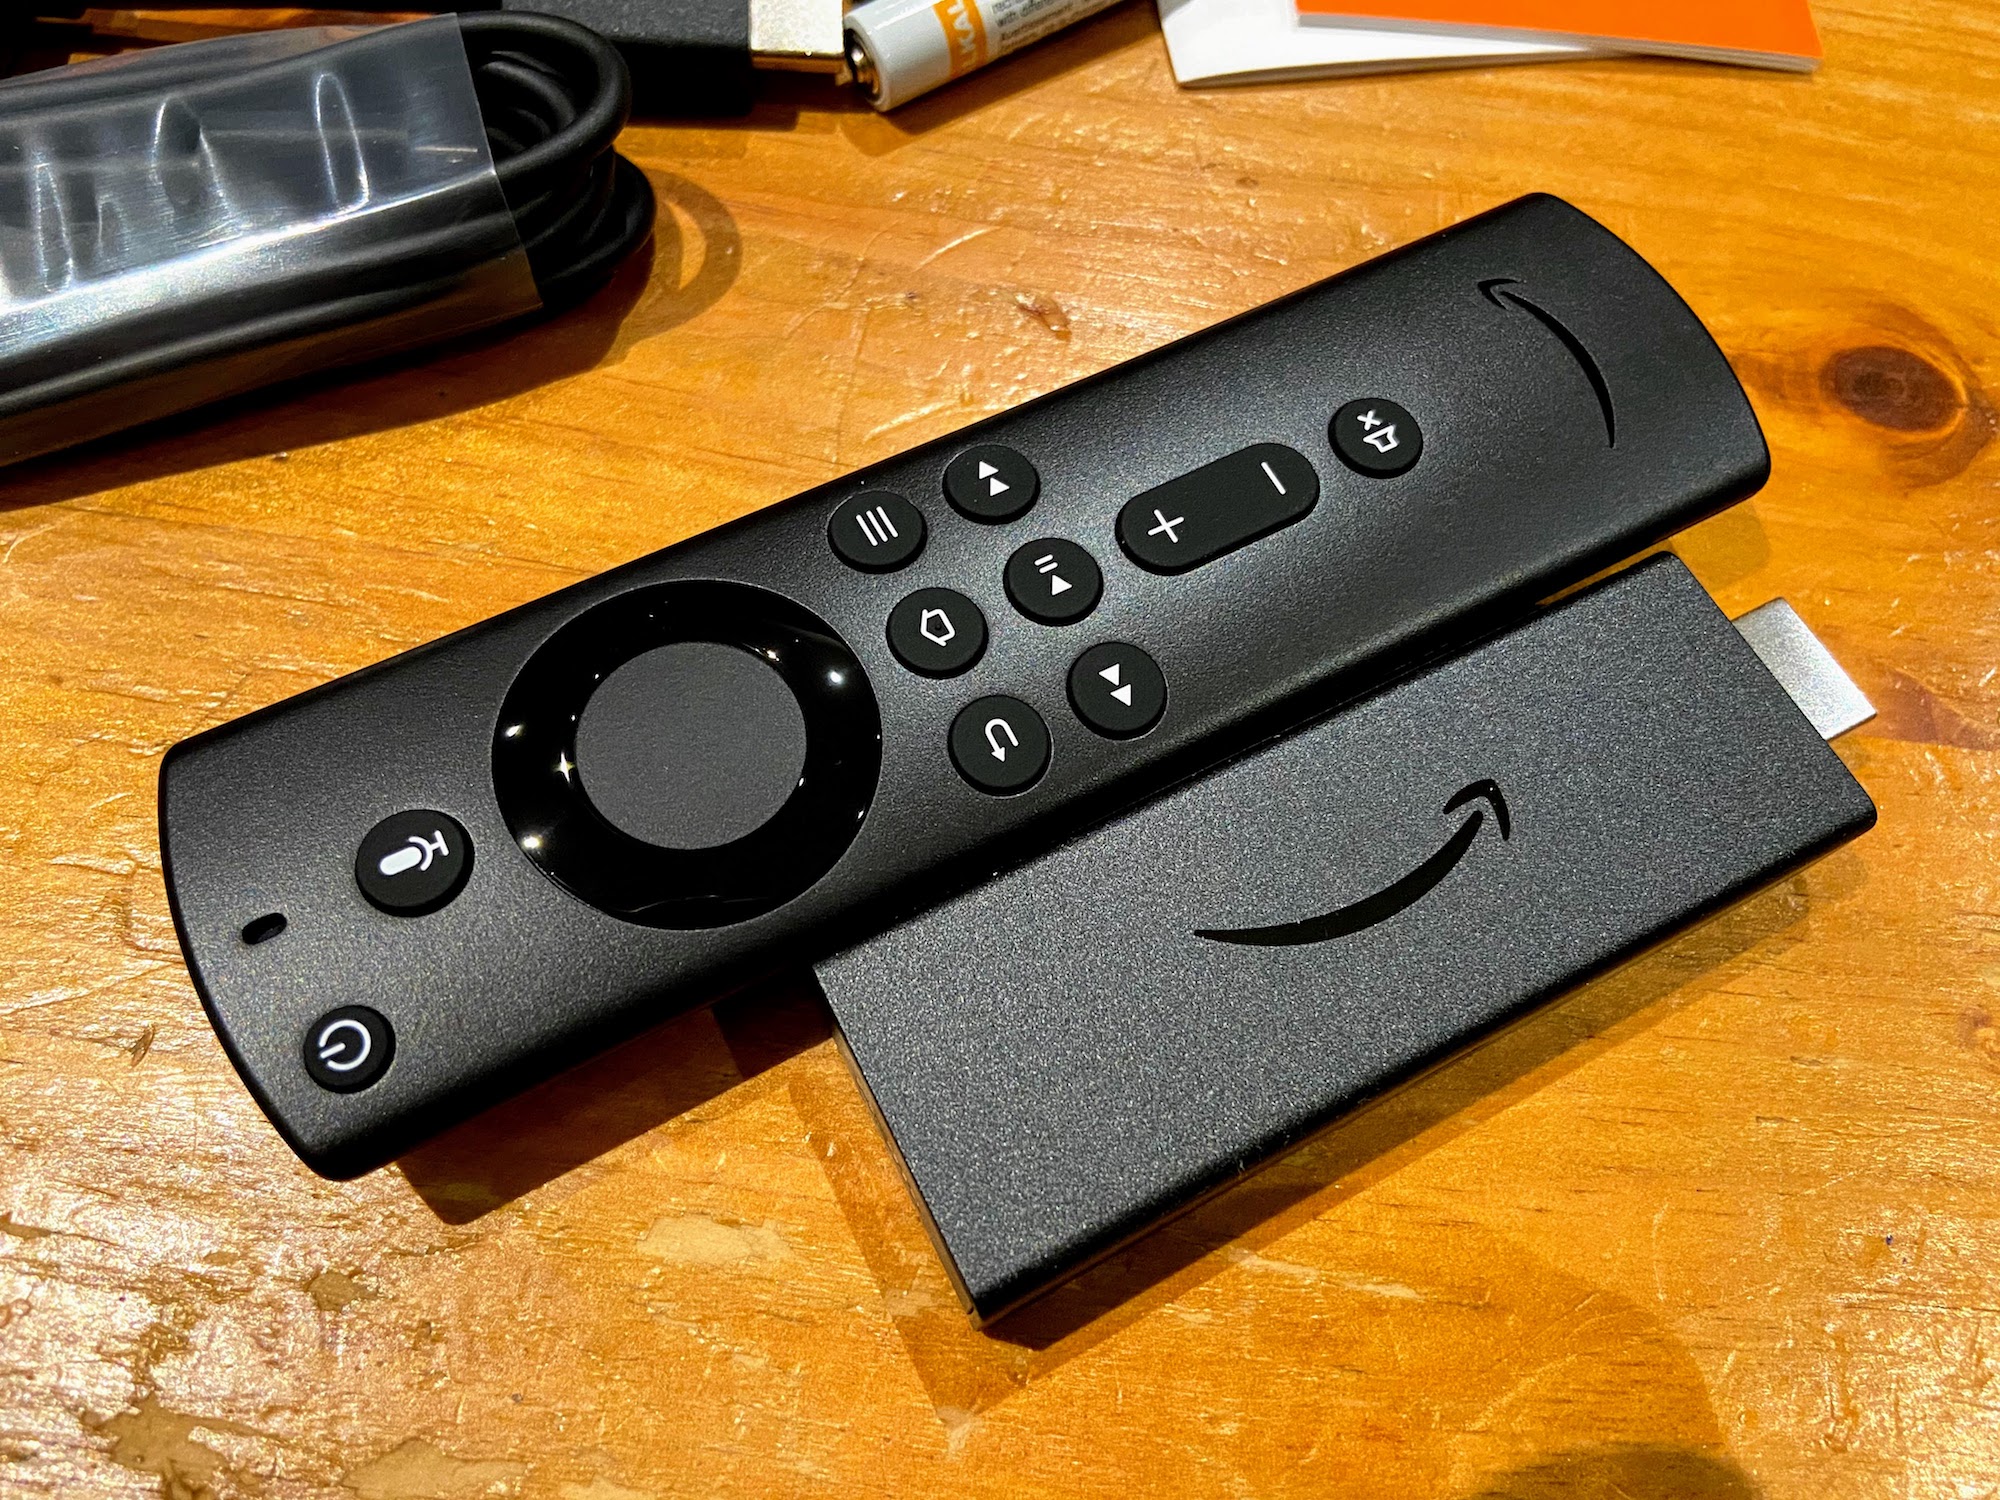 Fire TV Stick and Fire TV Stick Lite review: Exactly what you